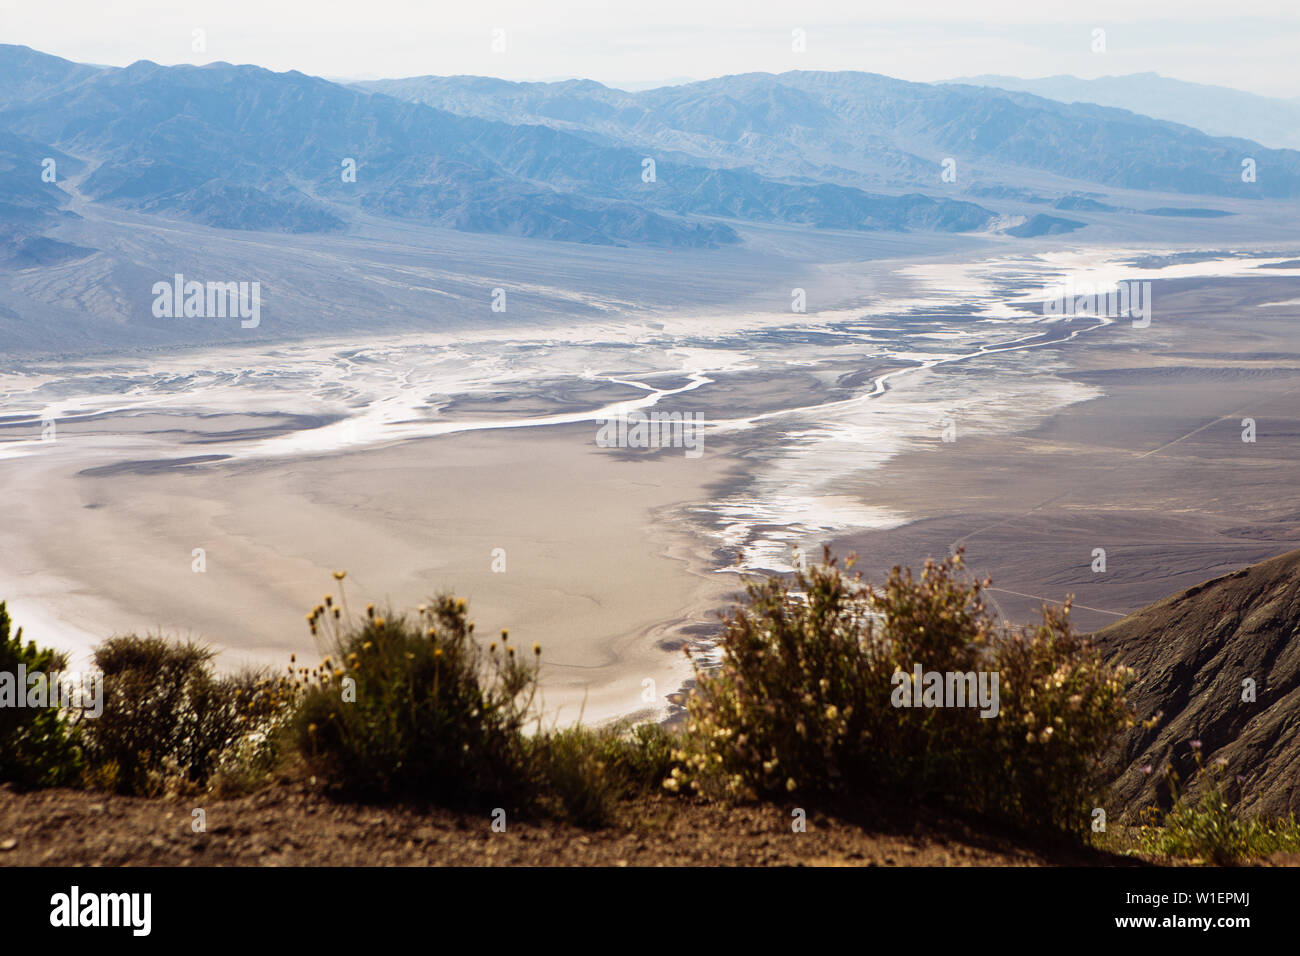 Devil's Golf Course and Badwater Basin salt flat from Dante's View observation point, Death Valley National Park, California, USA Stock Photo